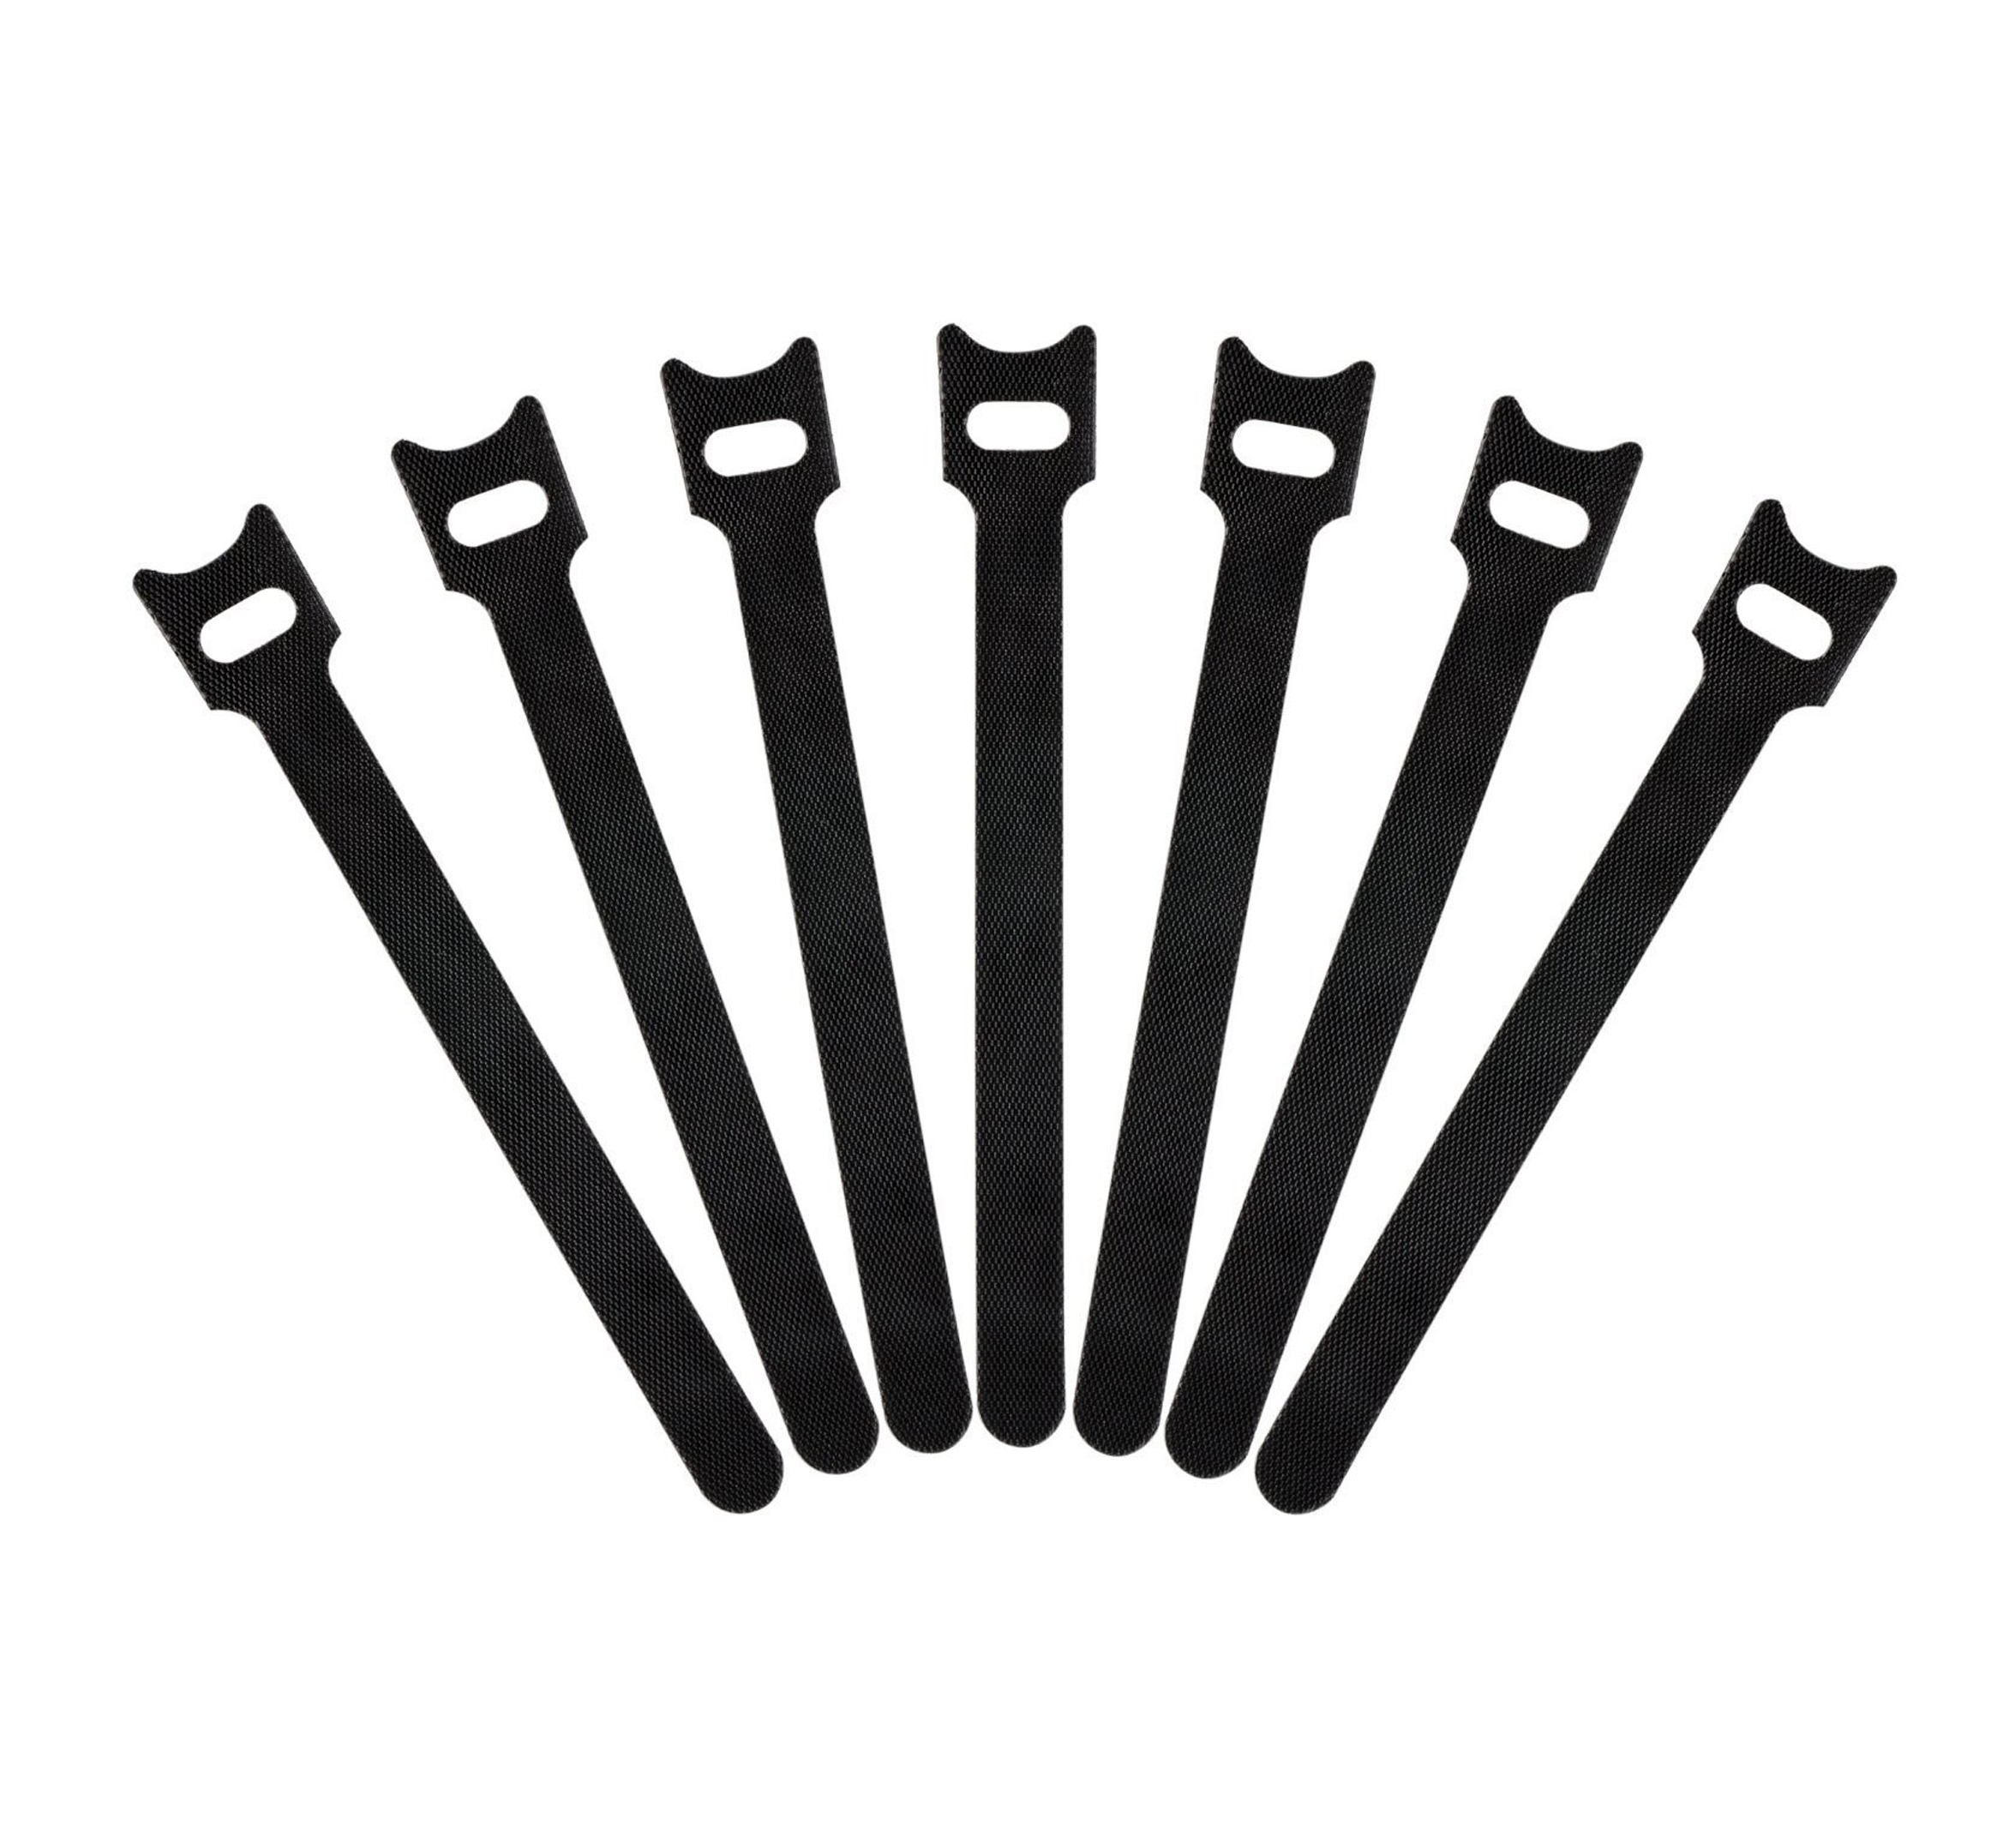 Adjustable Cable Ties 20mm Black Pack x 6 - Concordia Technologies